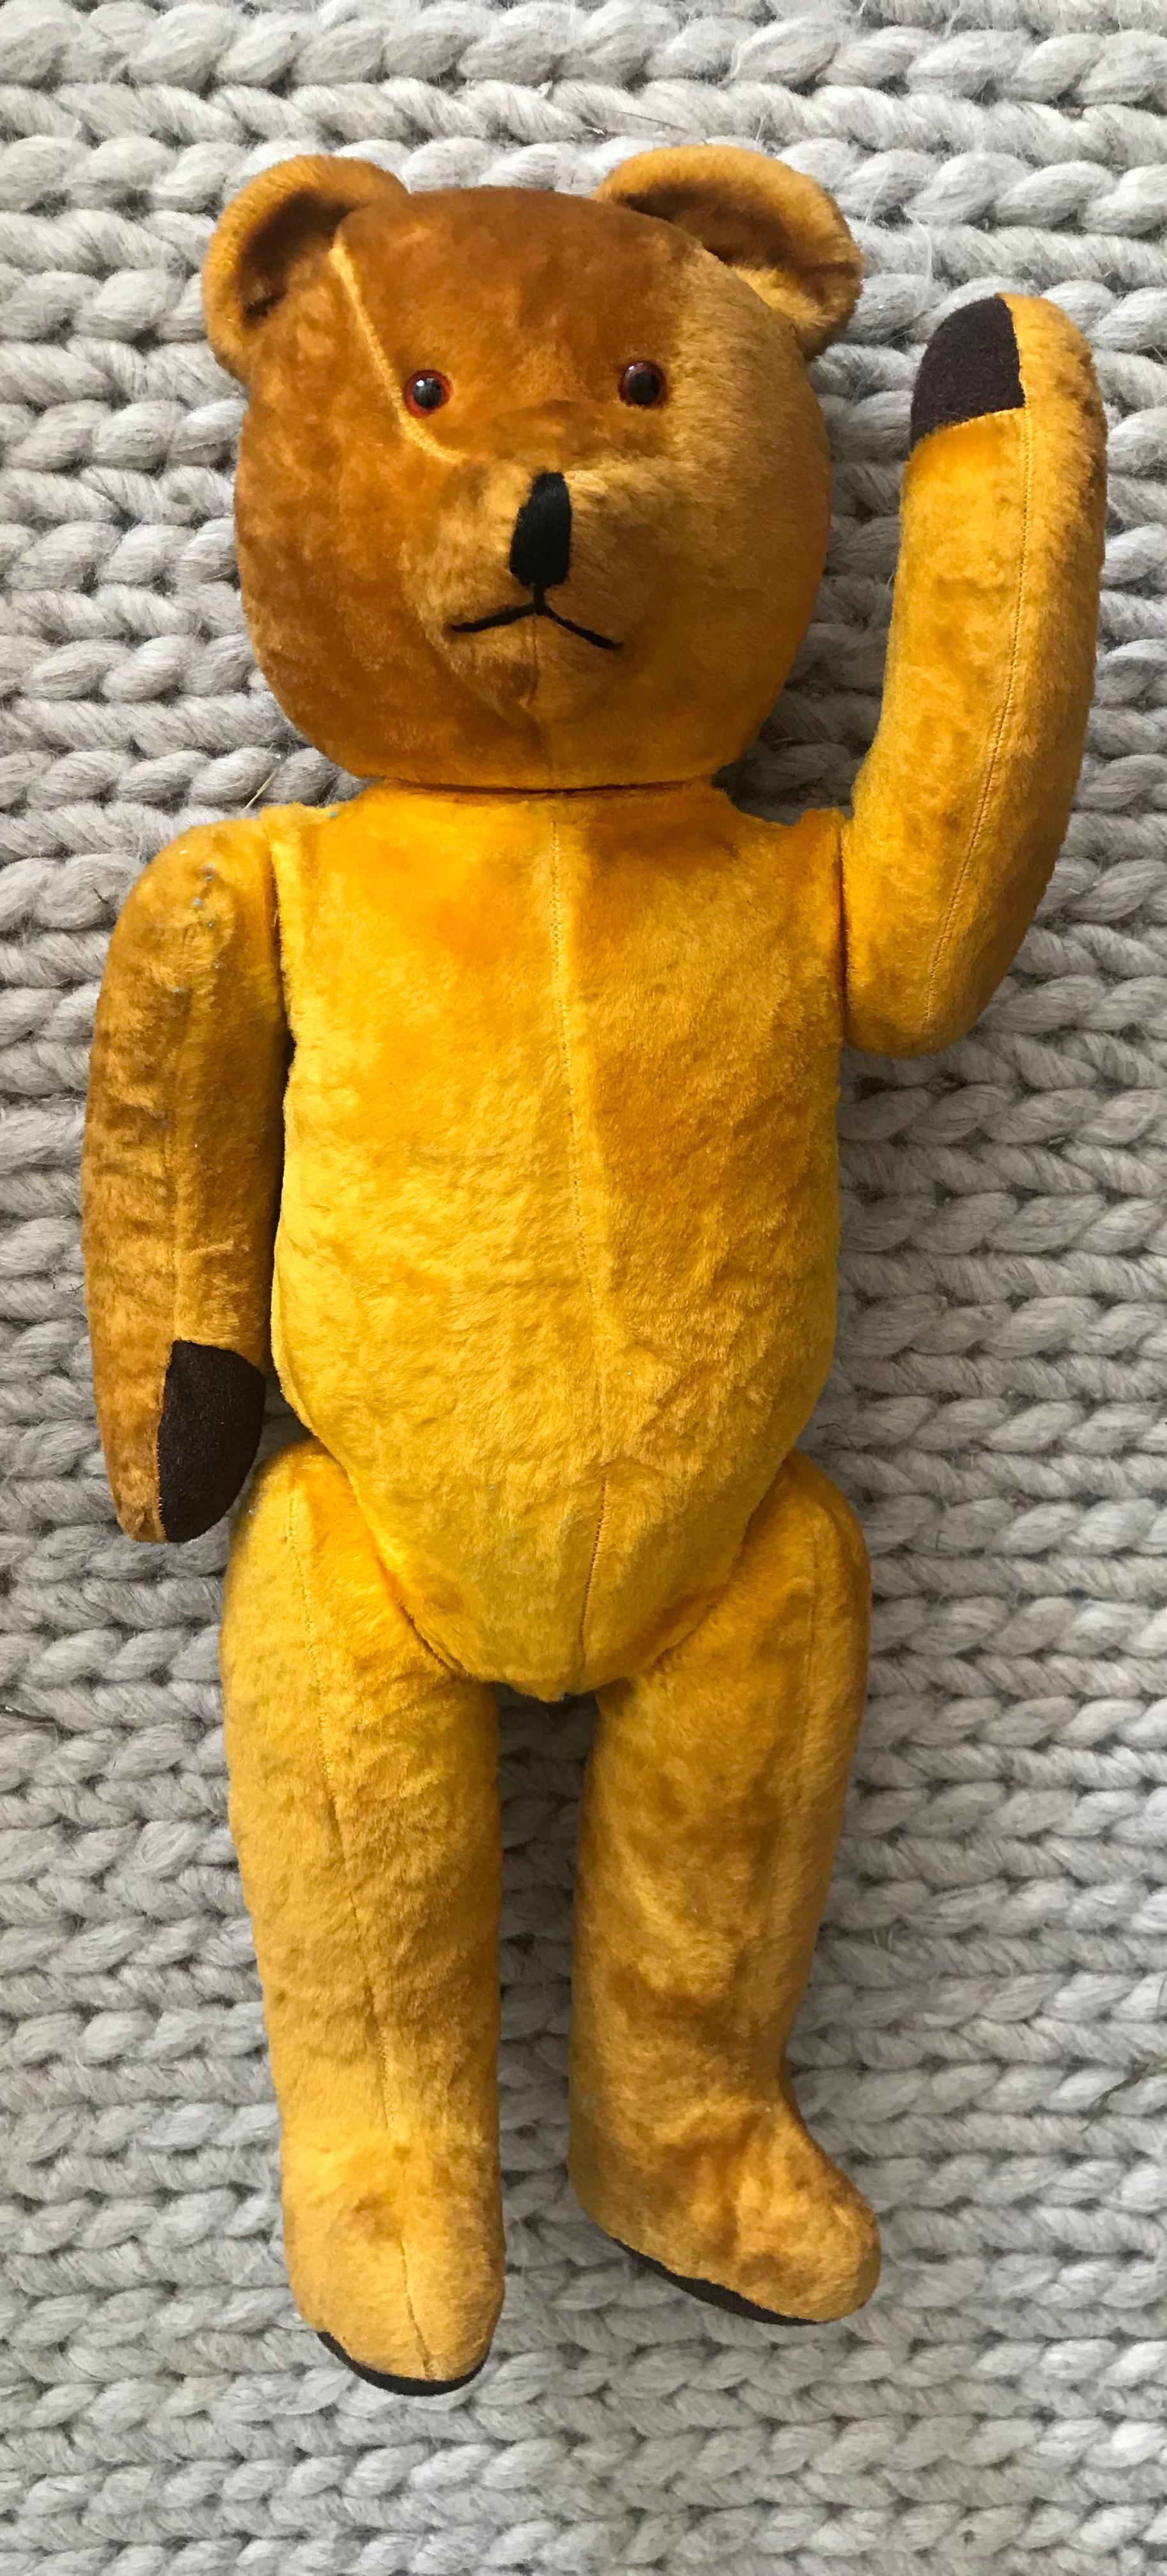 Mid-20th Century Teddy Bear in Yellow/Brown Mohair, Germany ‘Steiff?’, circa 1950 For Sale